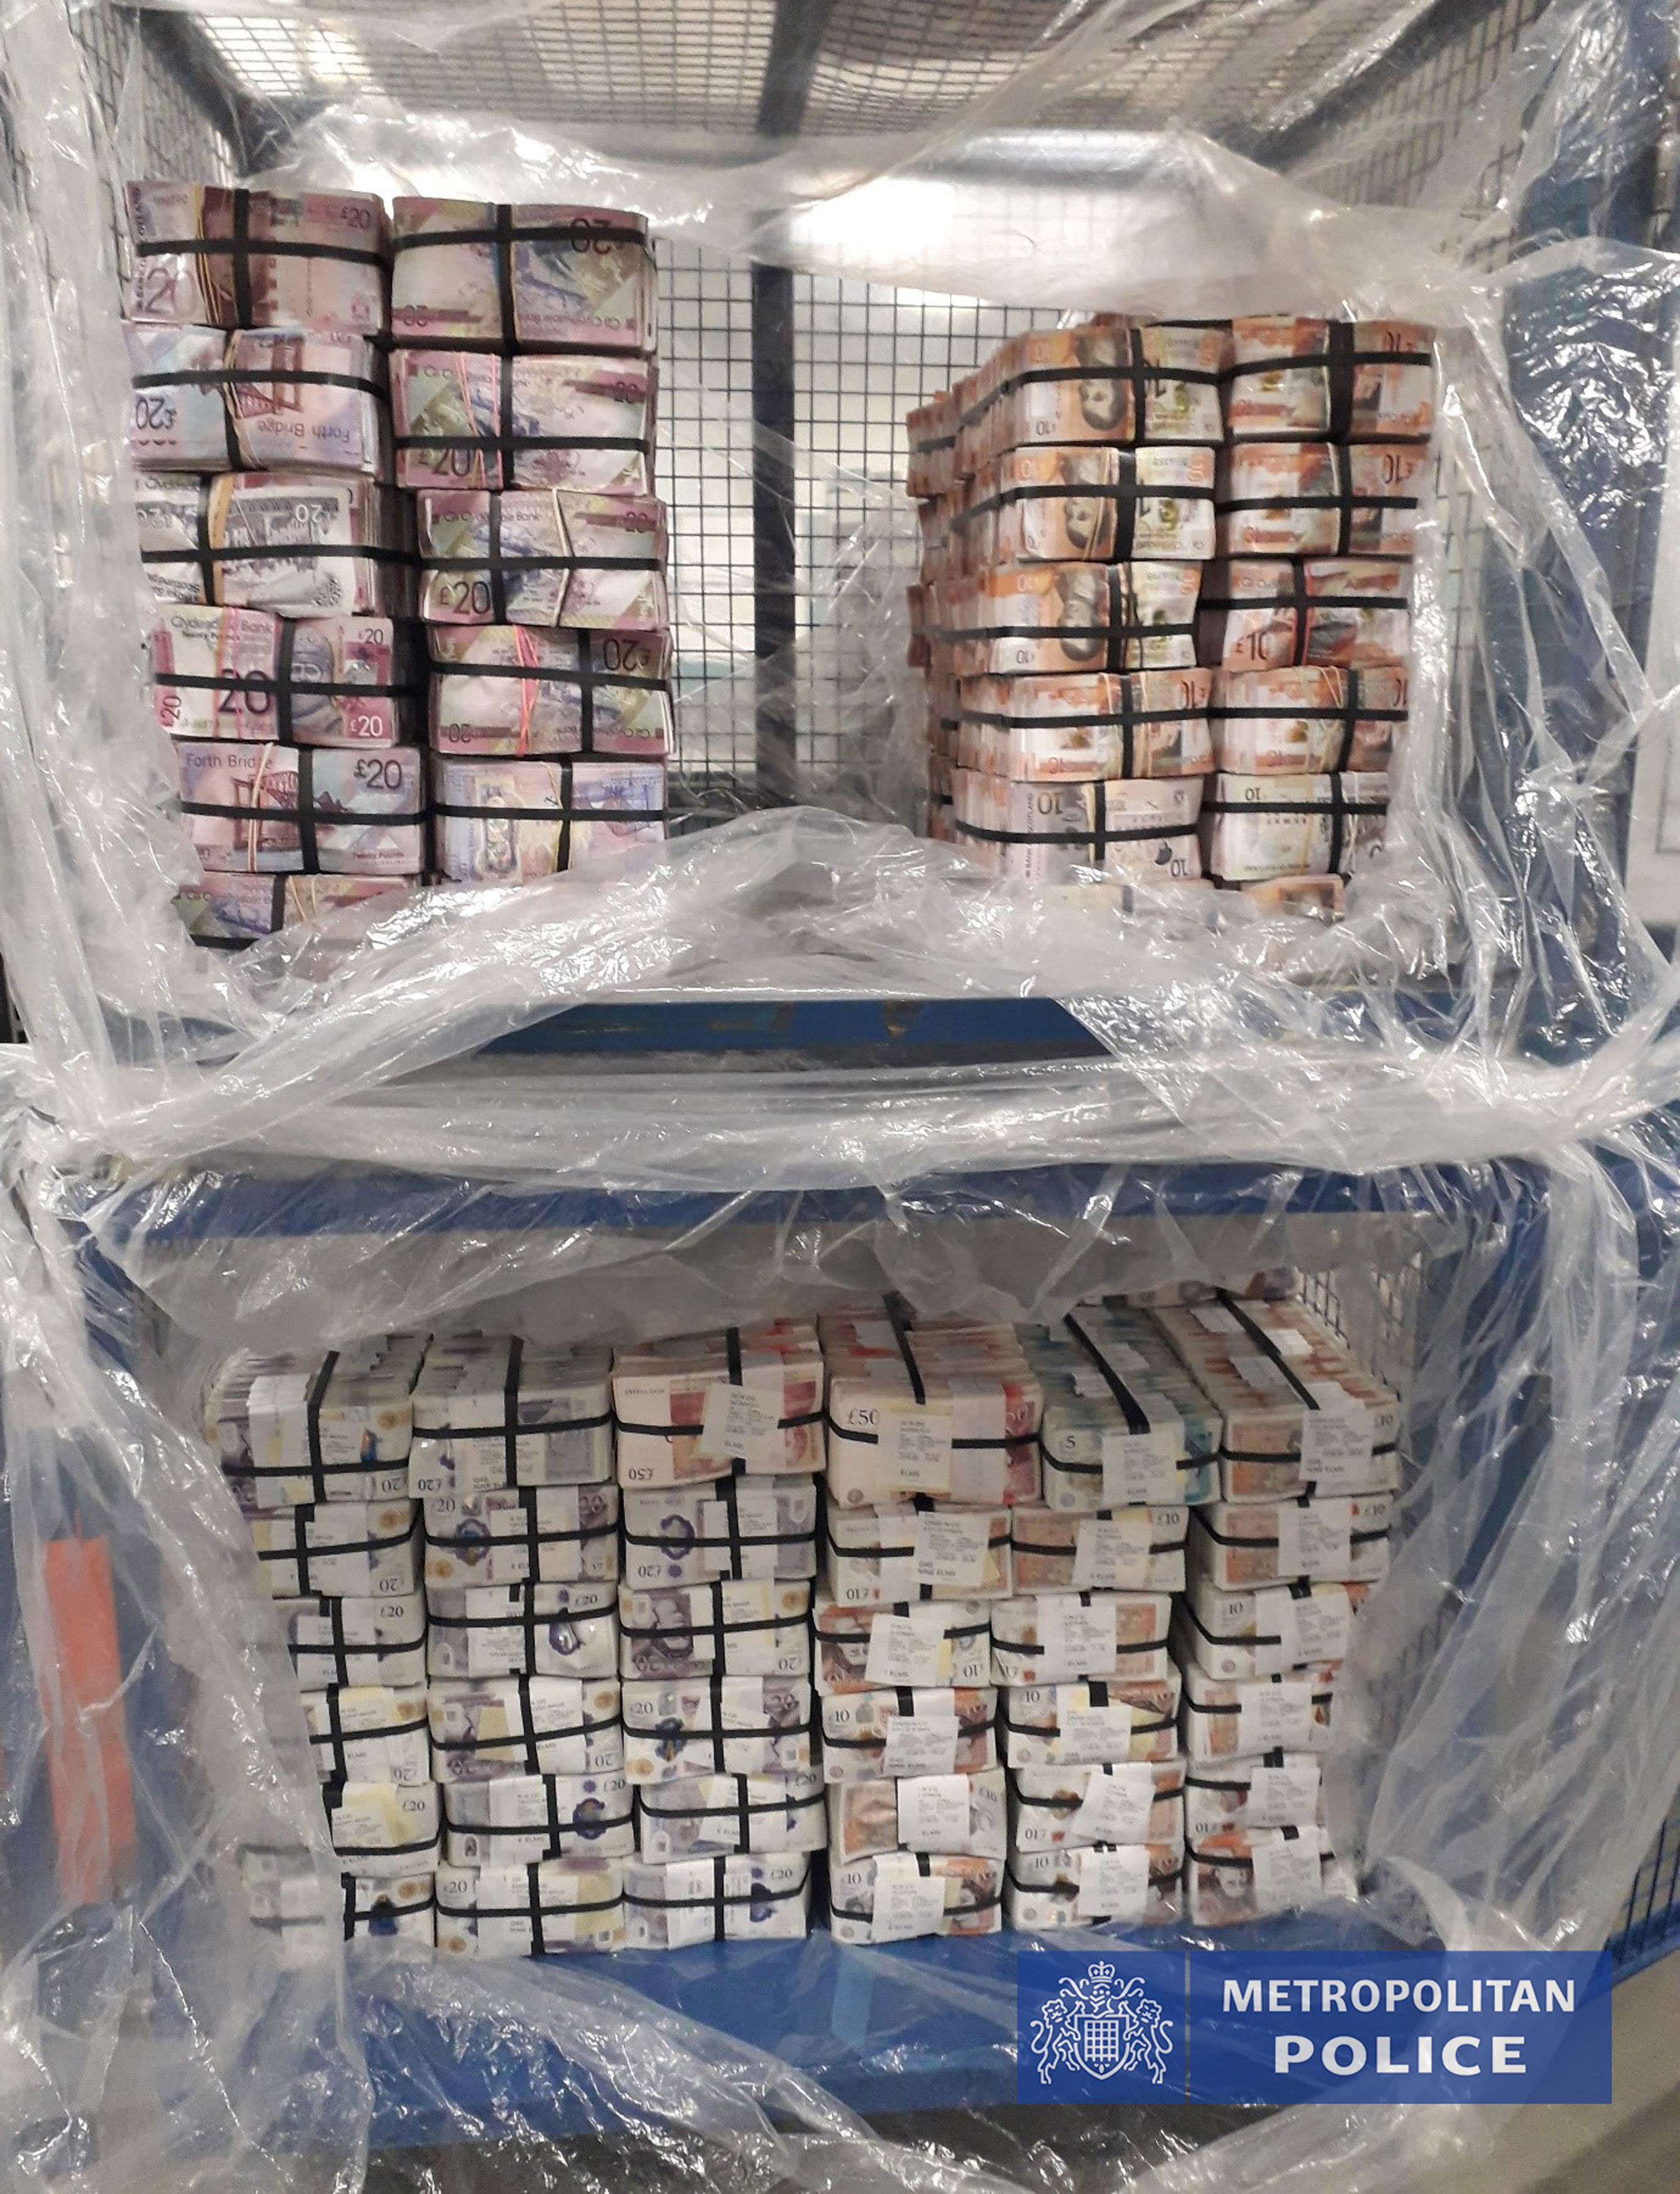 Millions of pounds in cash was seized by police during the EncroChat operation